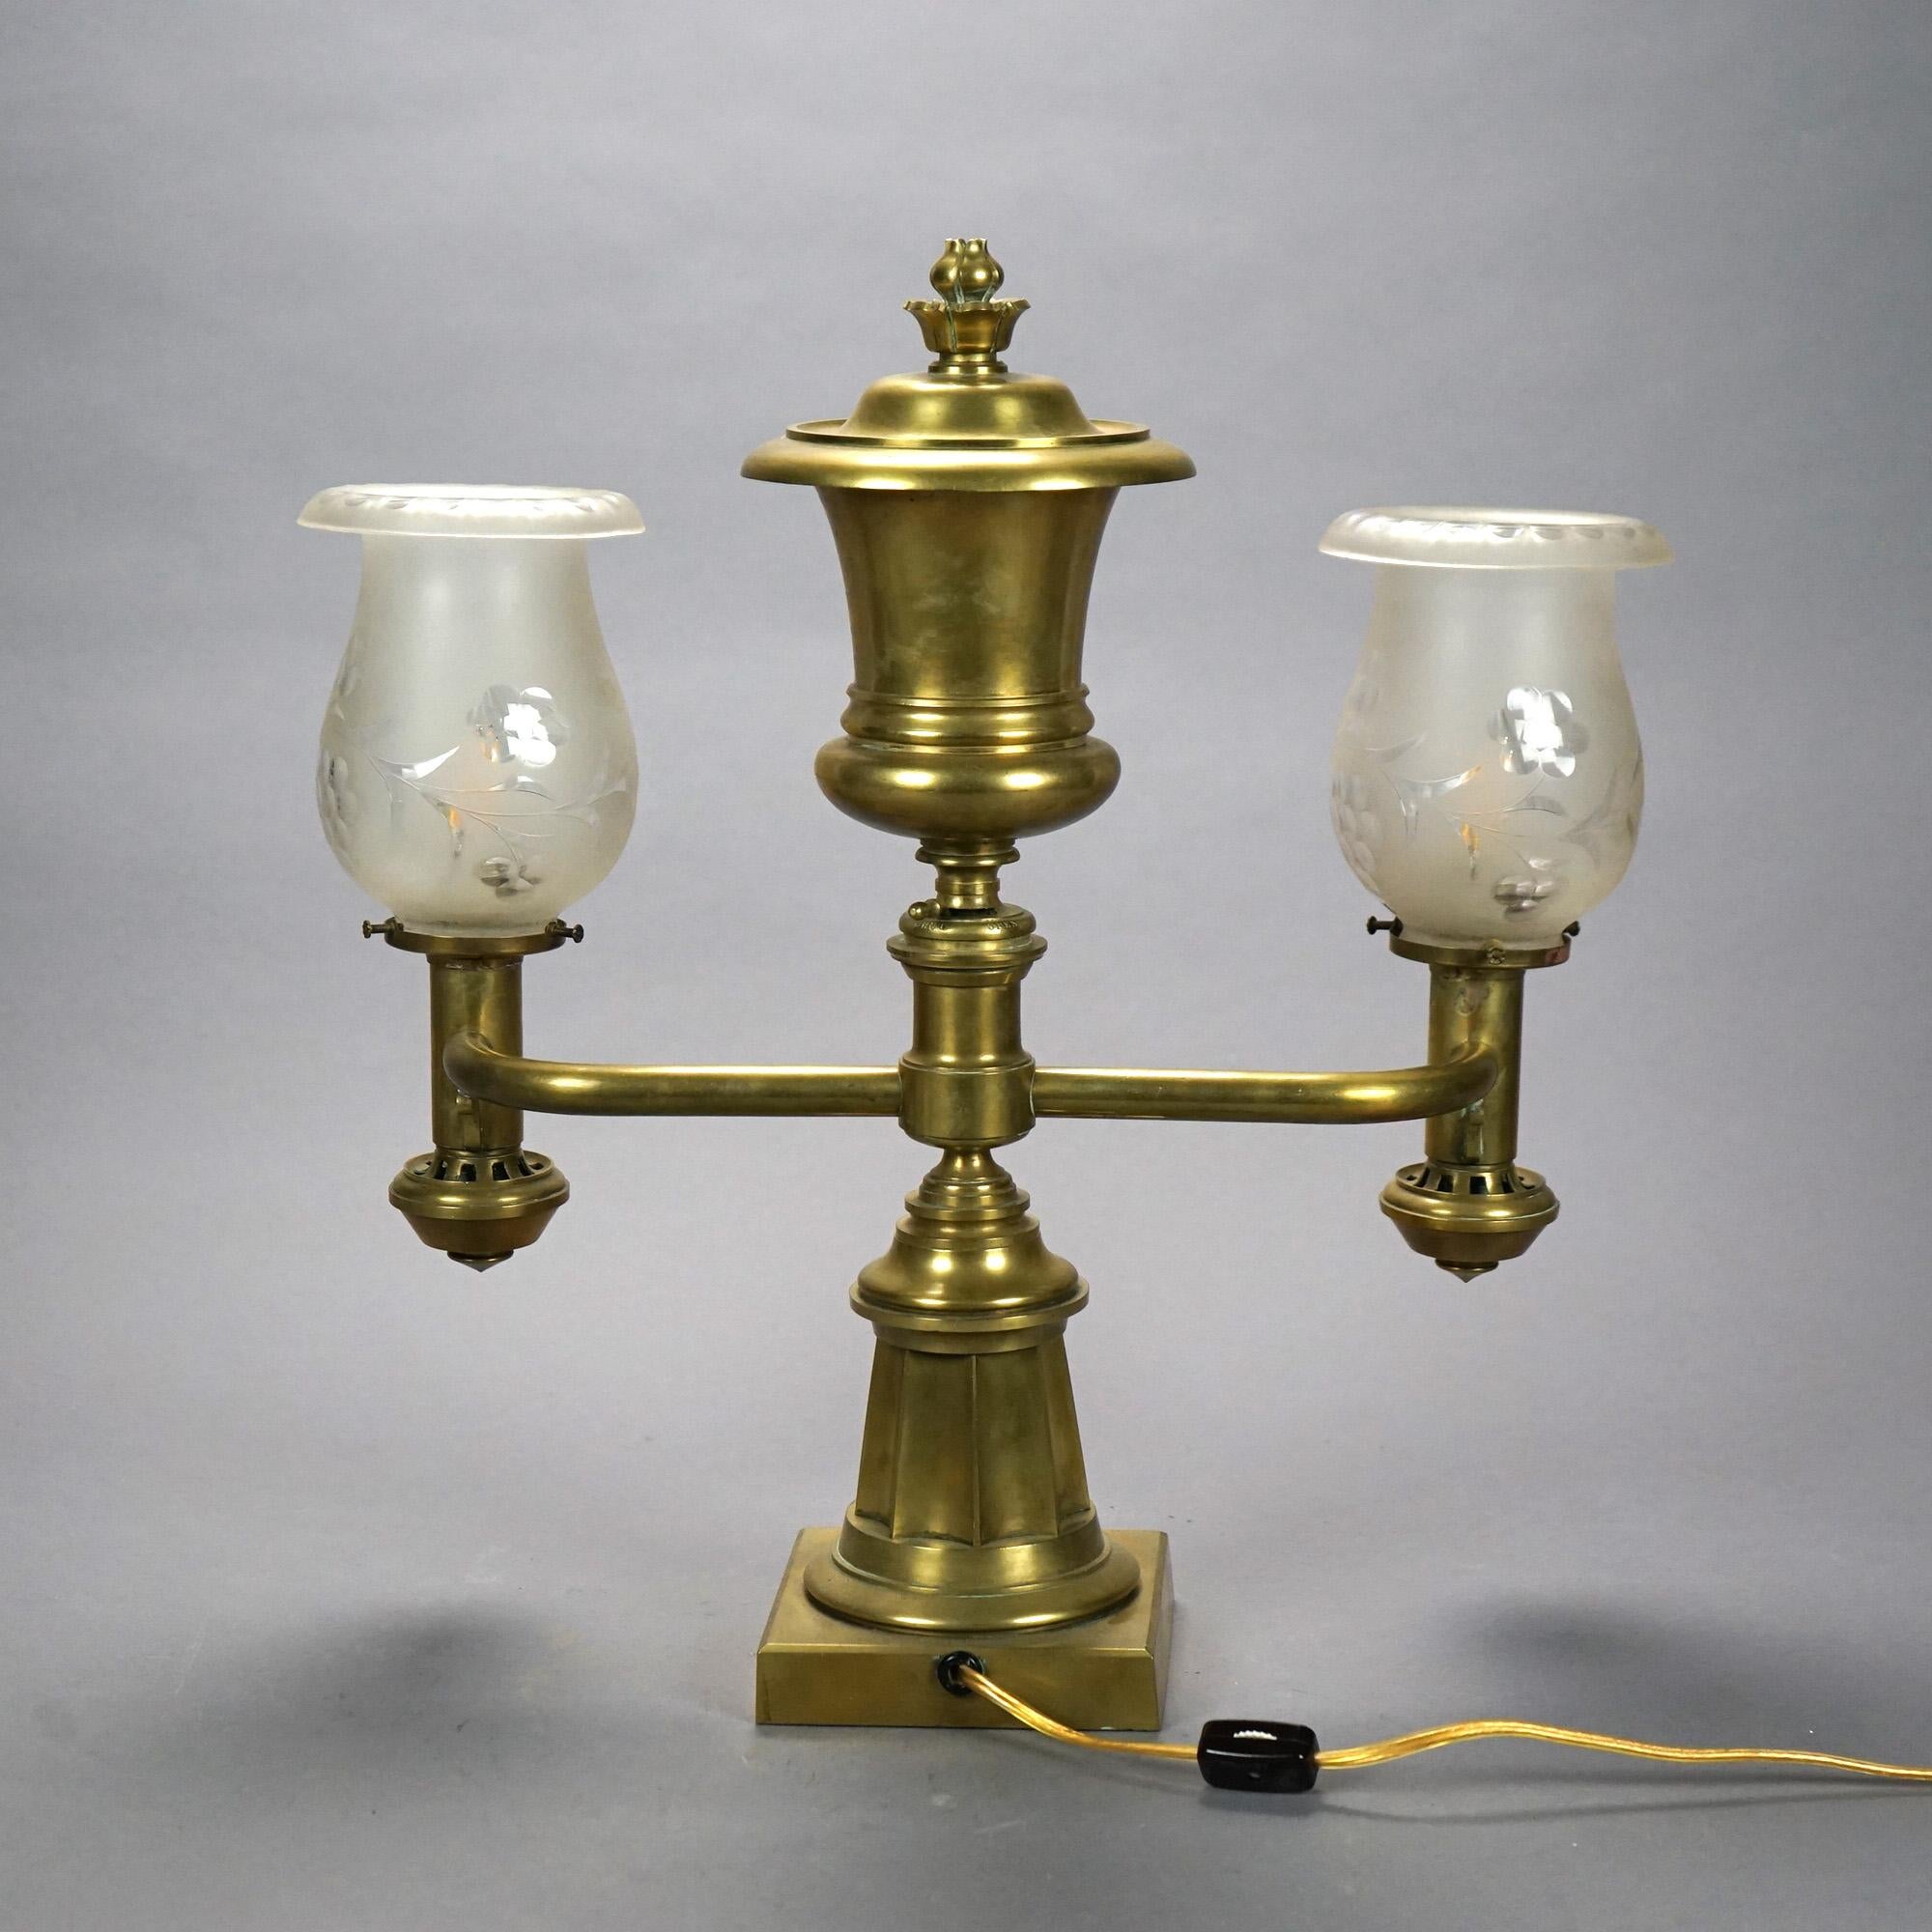 An antique argand table lamp offers cast brass and bronze base with font having floral finial and surmounting base with flared and faceted plinth with two arms terminating in lights having frosted glass shades with floral decoration, electrified,